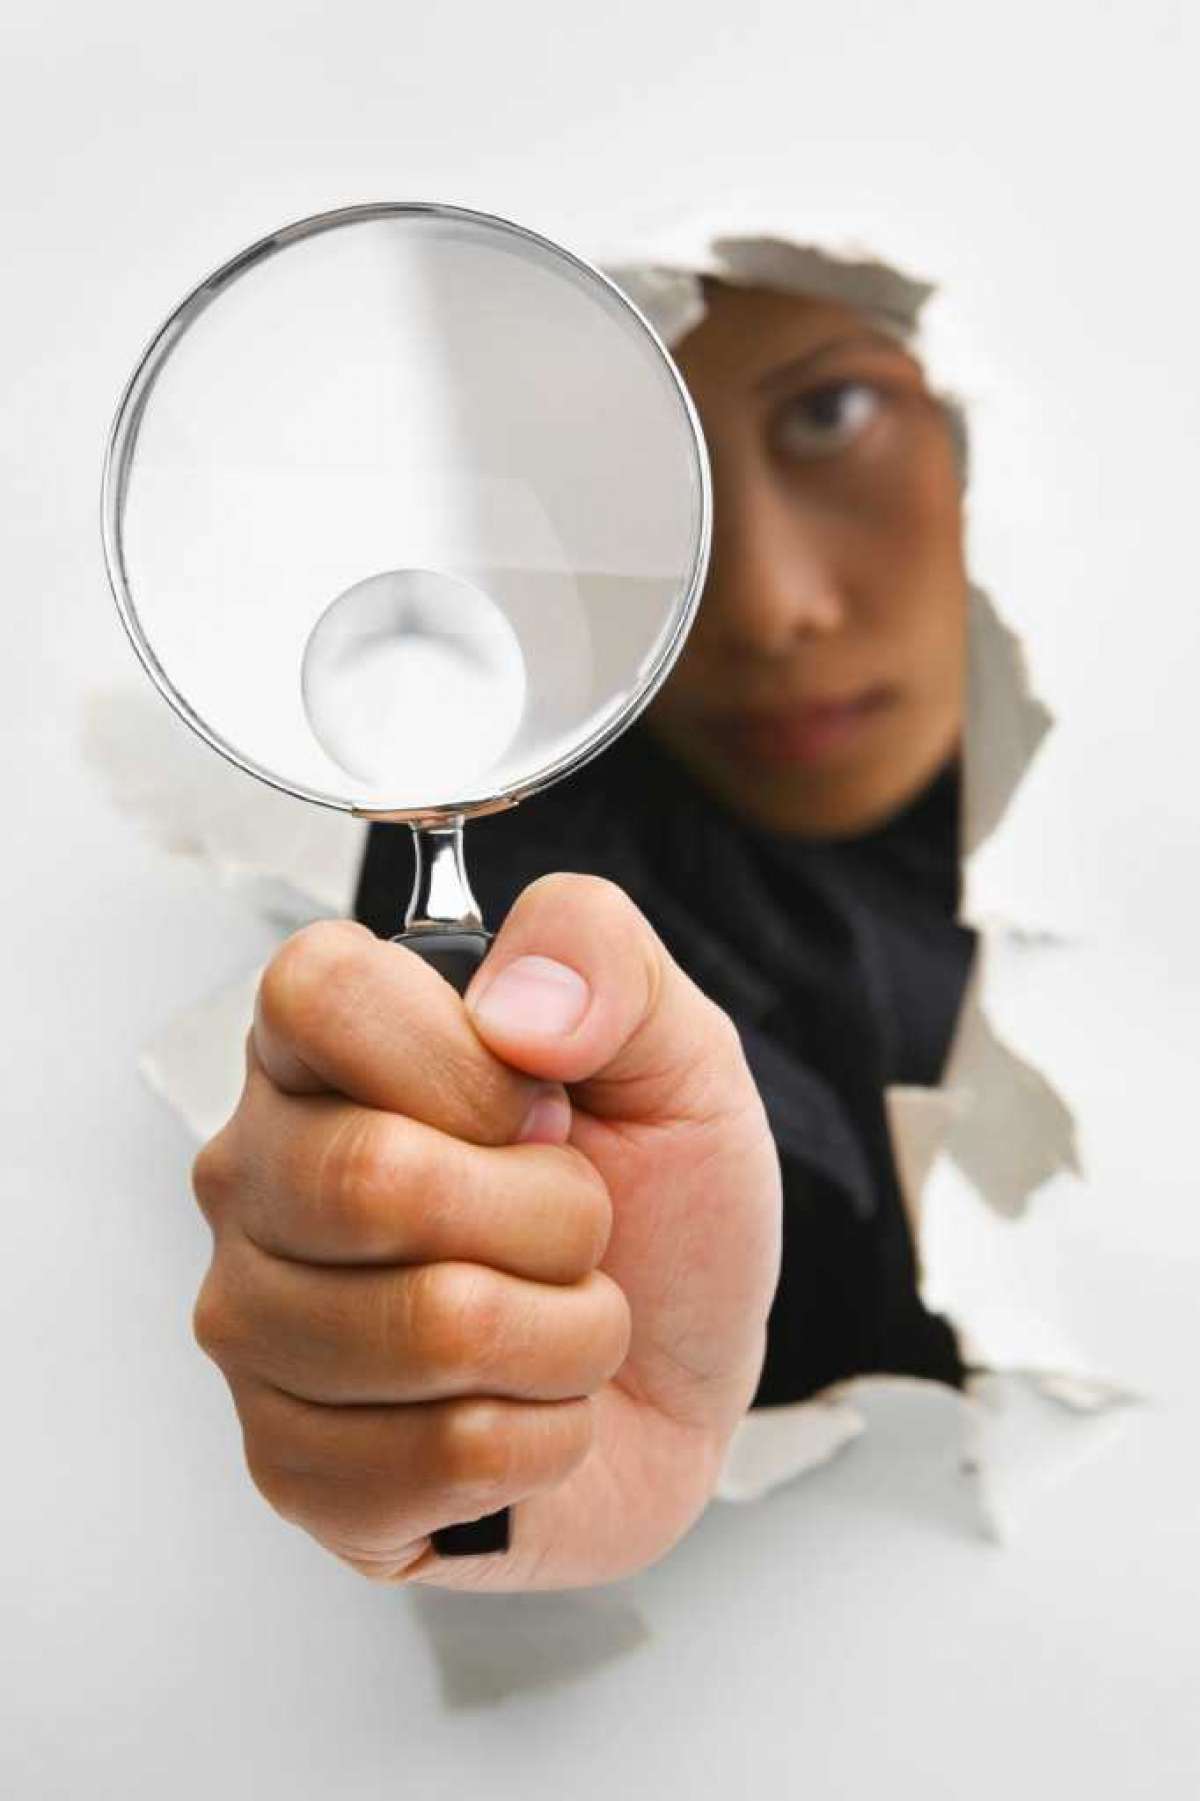 Private Investigator with magnifying glass